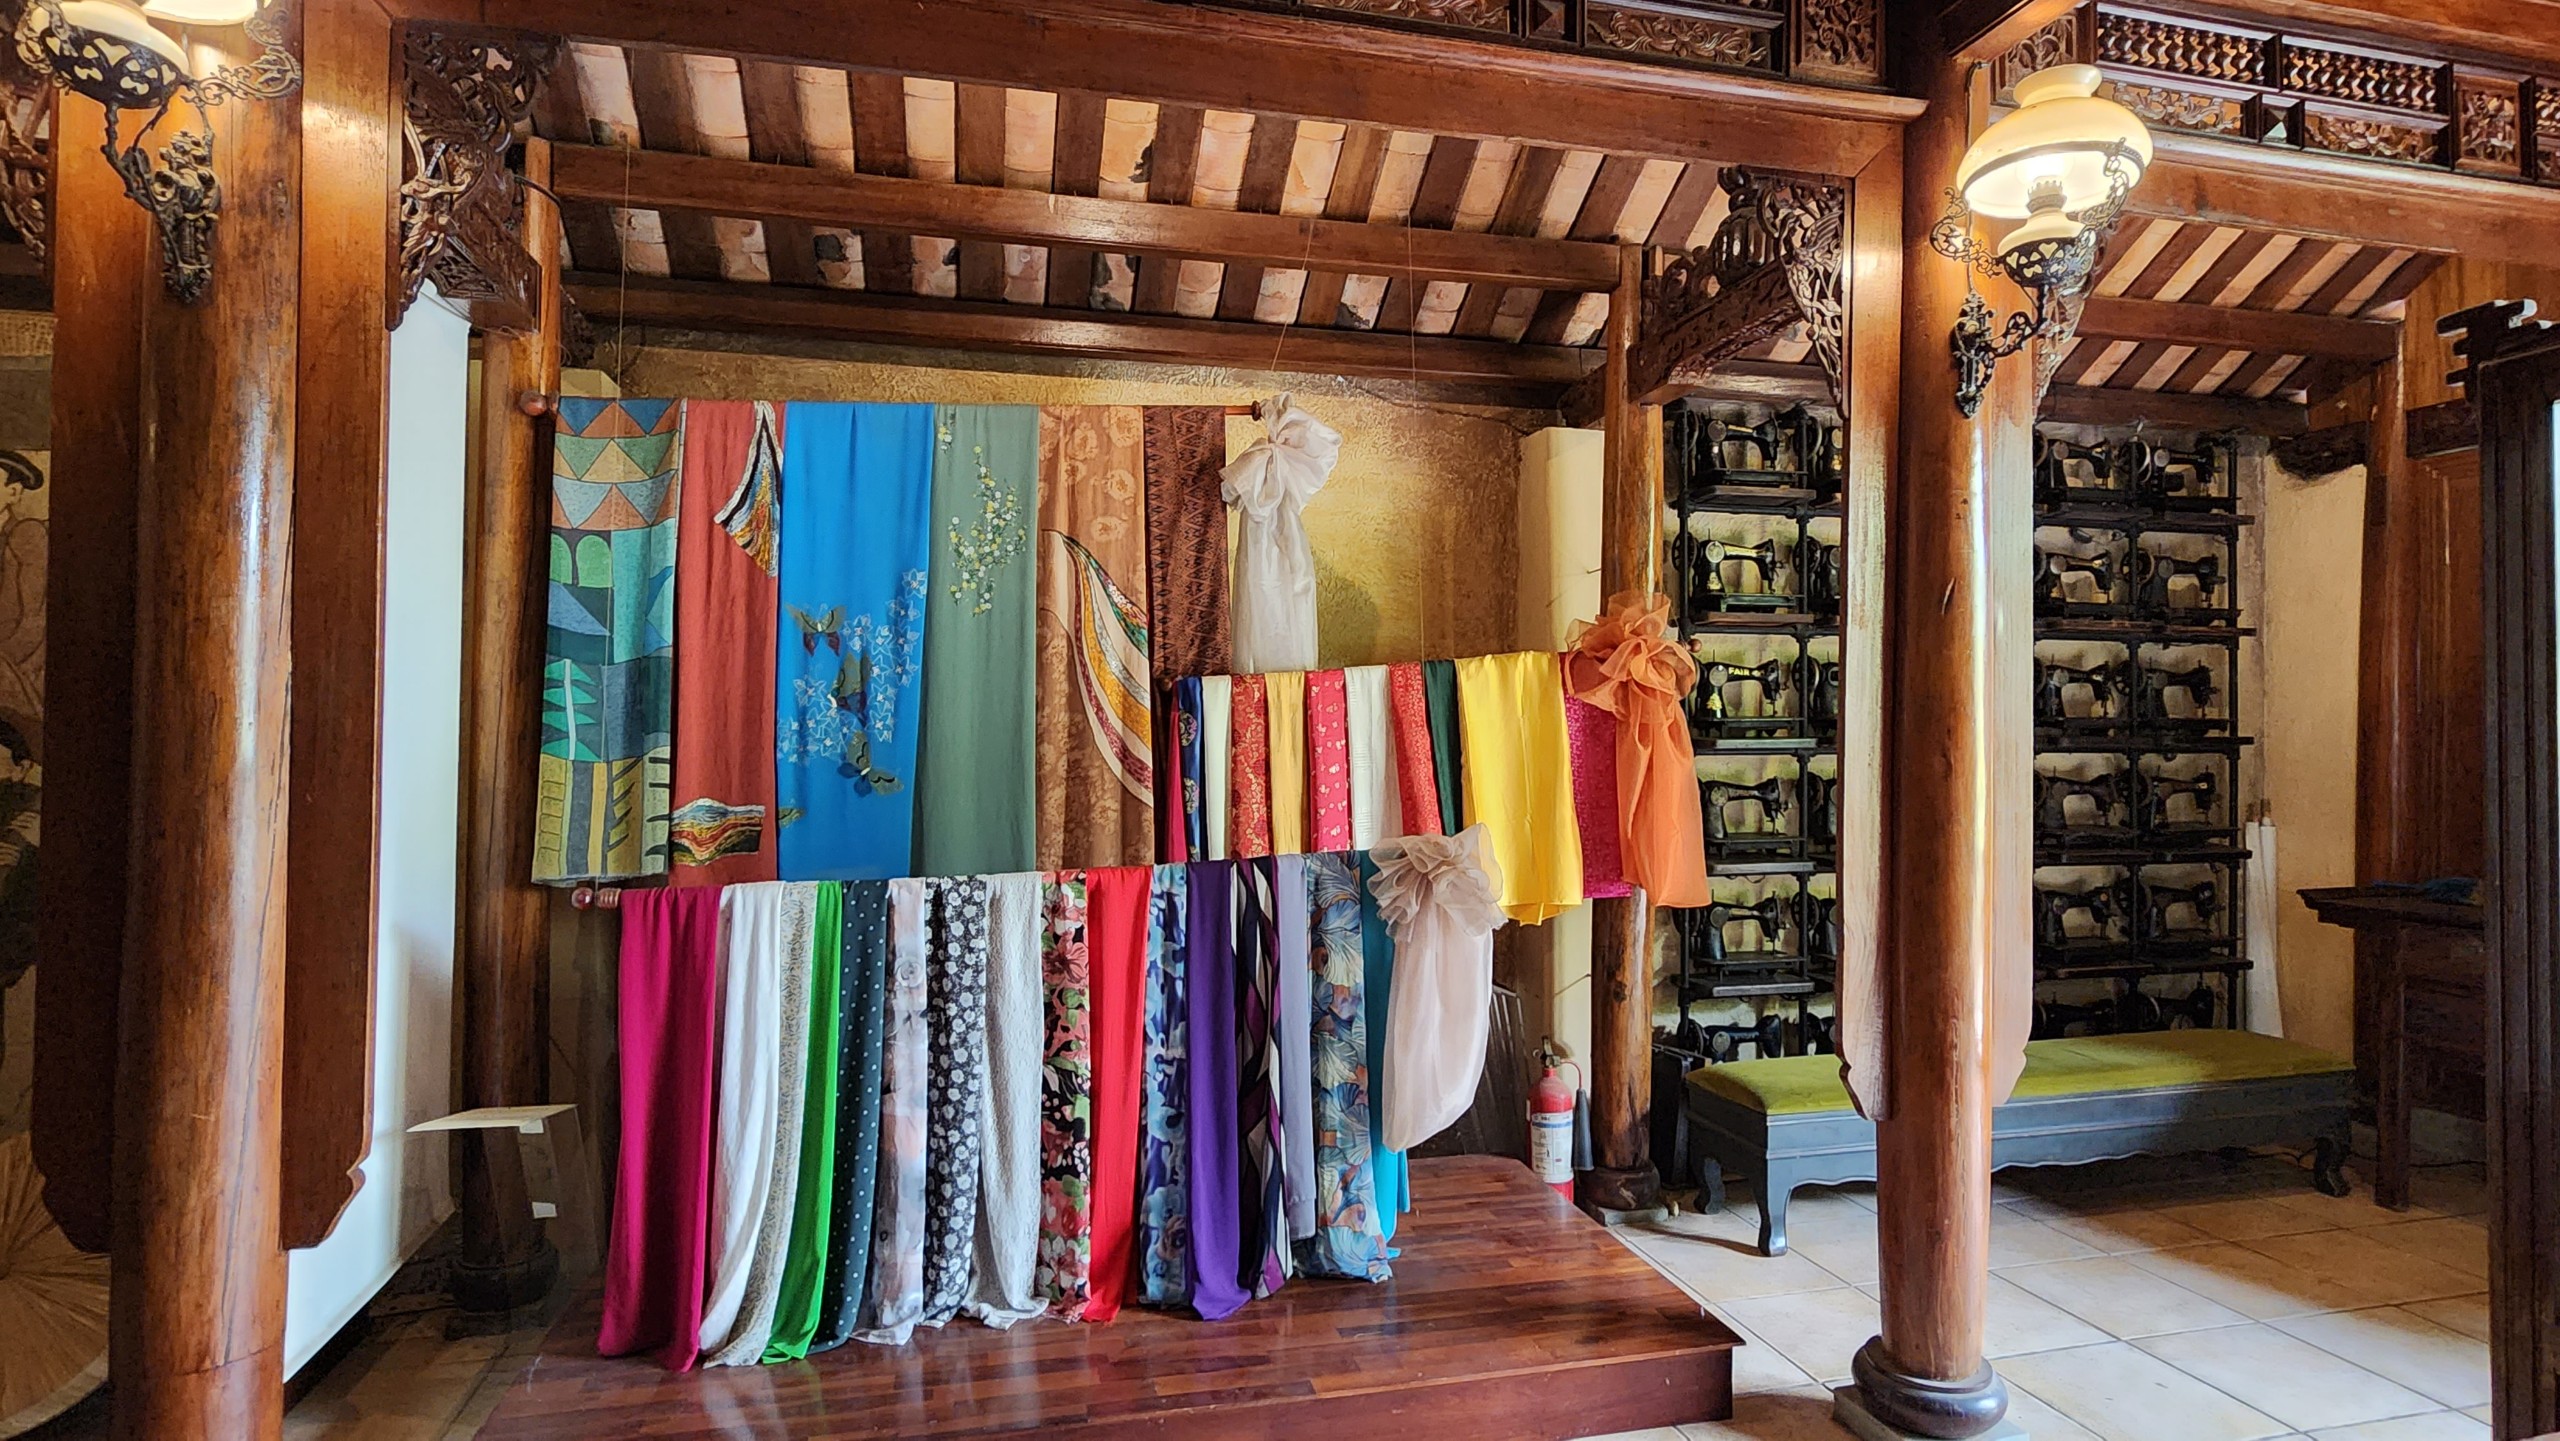 Fabric used to make ao dai is displayed at the museum. Photo: Minh Chau / Tuoi Tre News